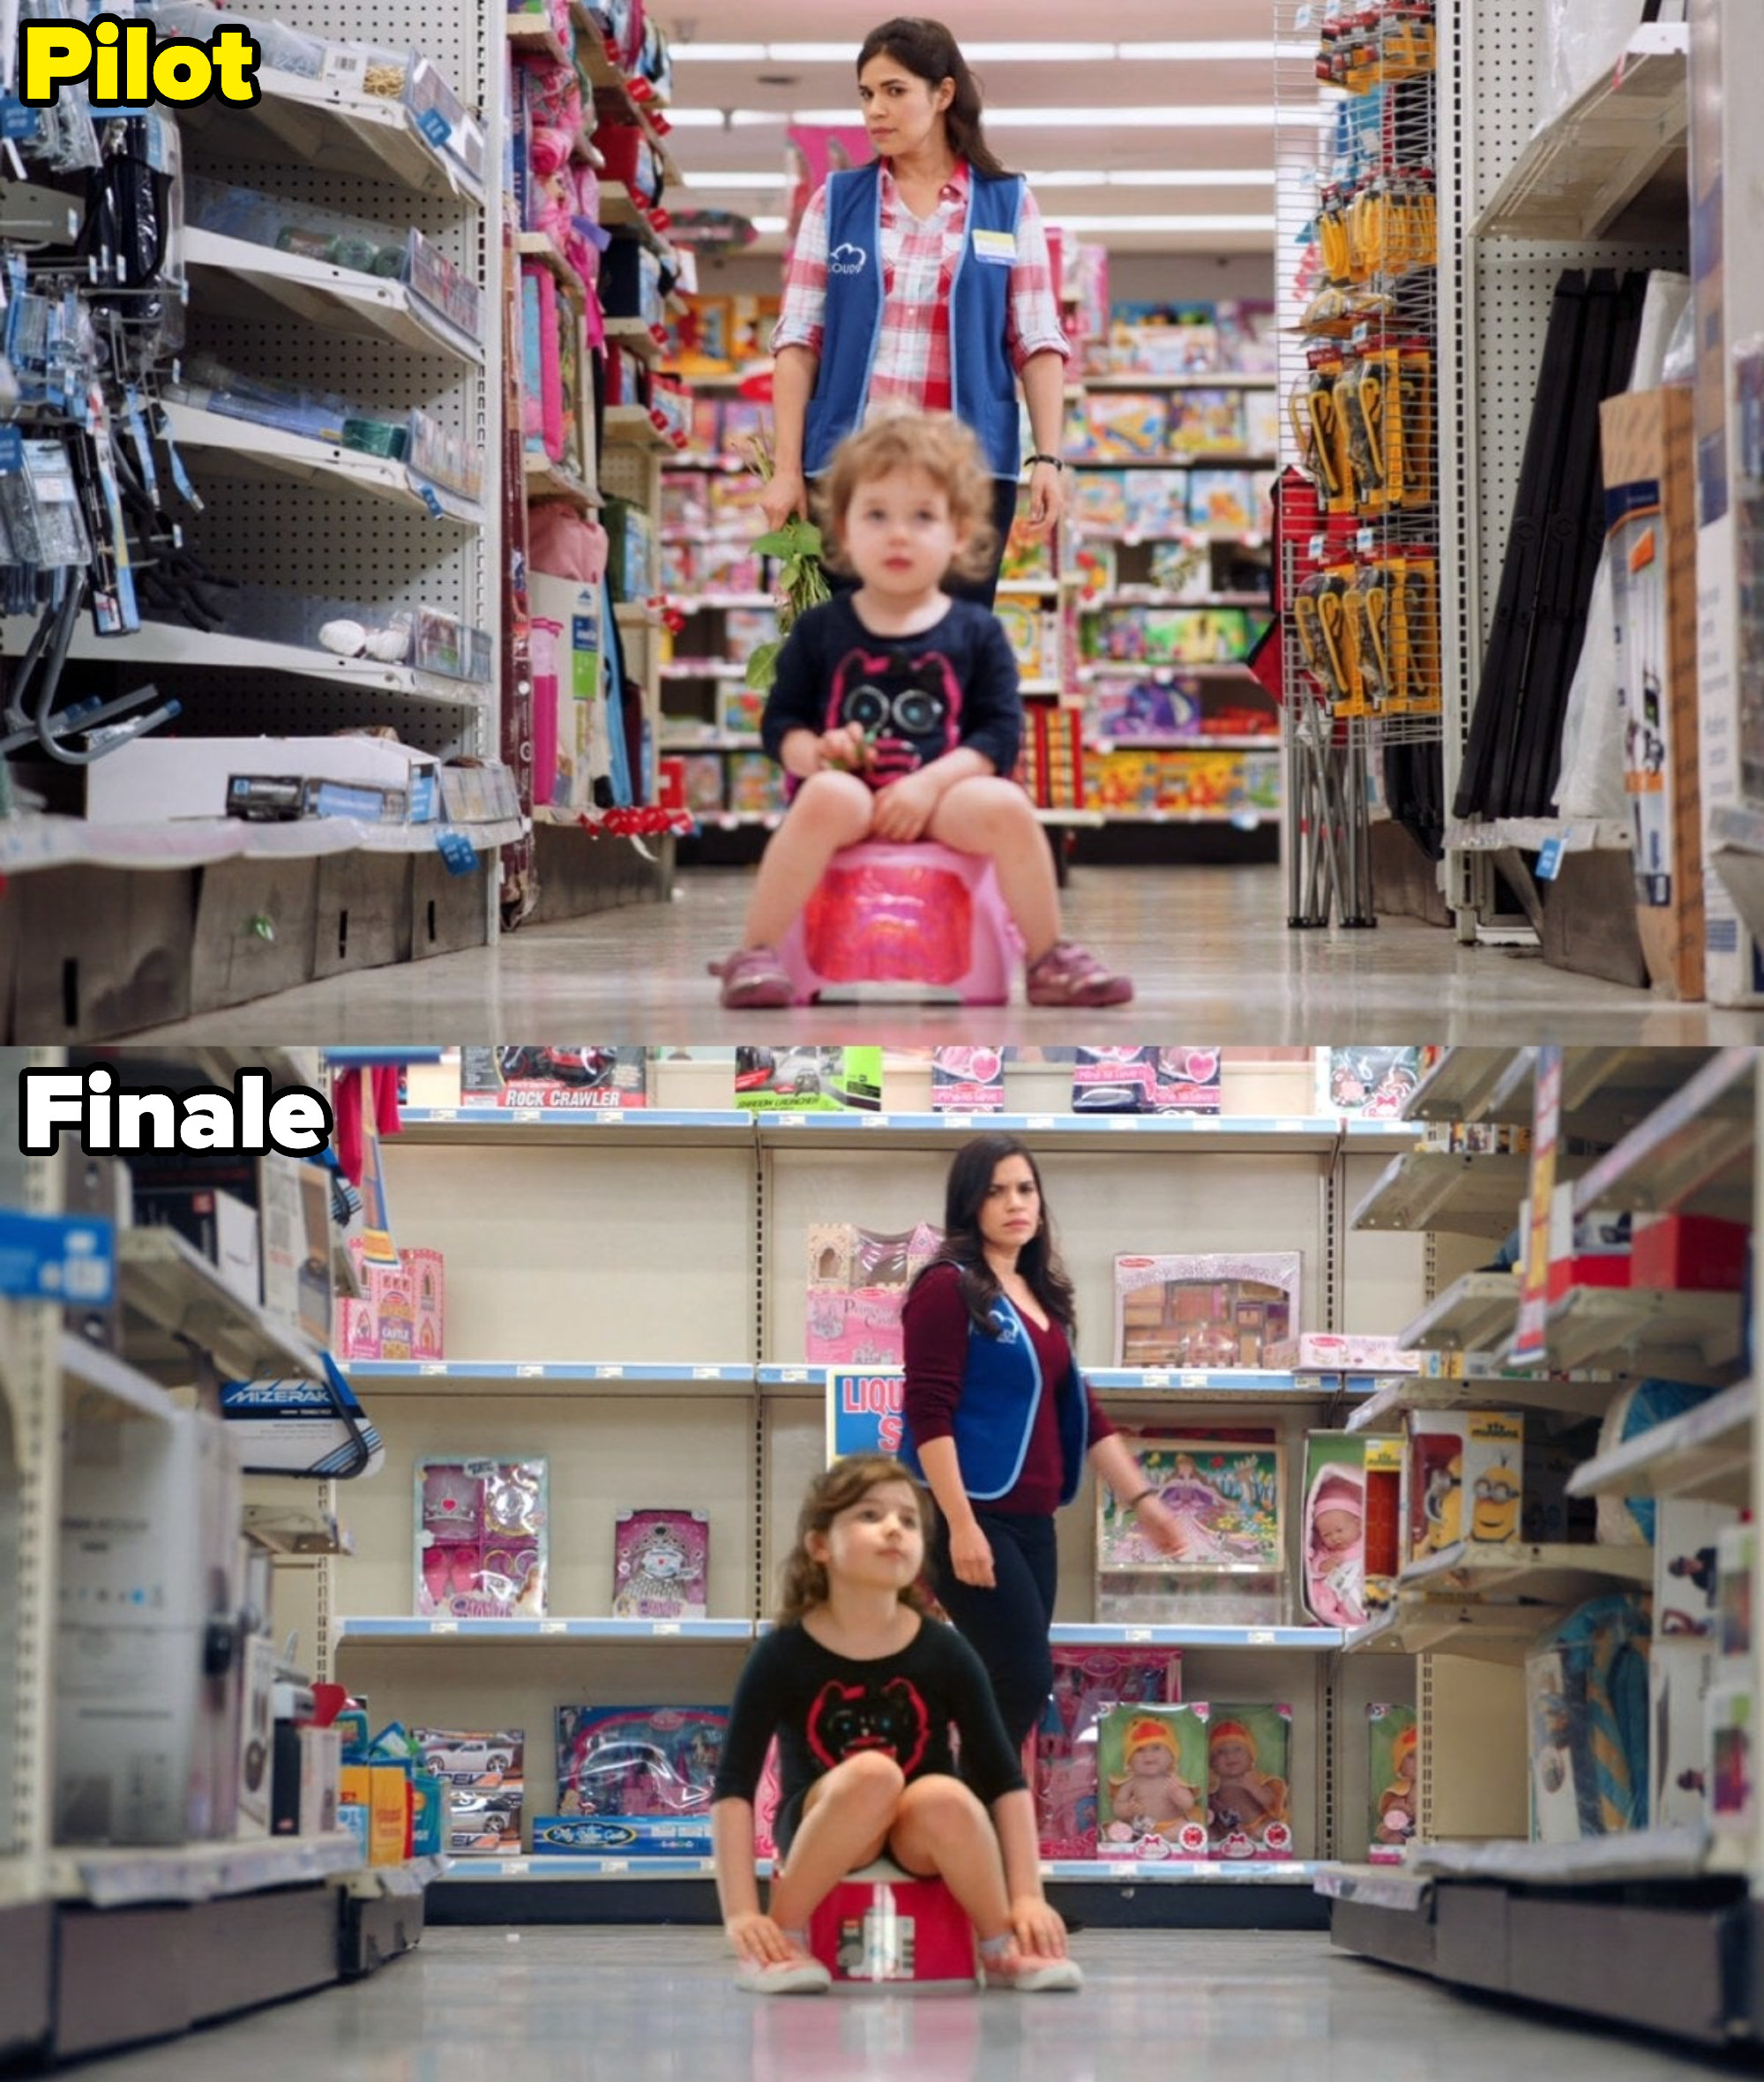 shots of a child sitting on a potty in both the premiere and finale of superstore